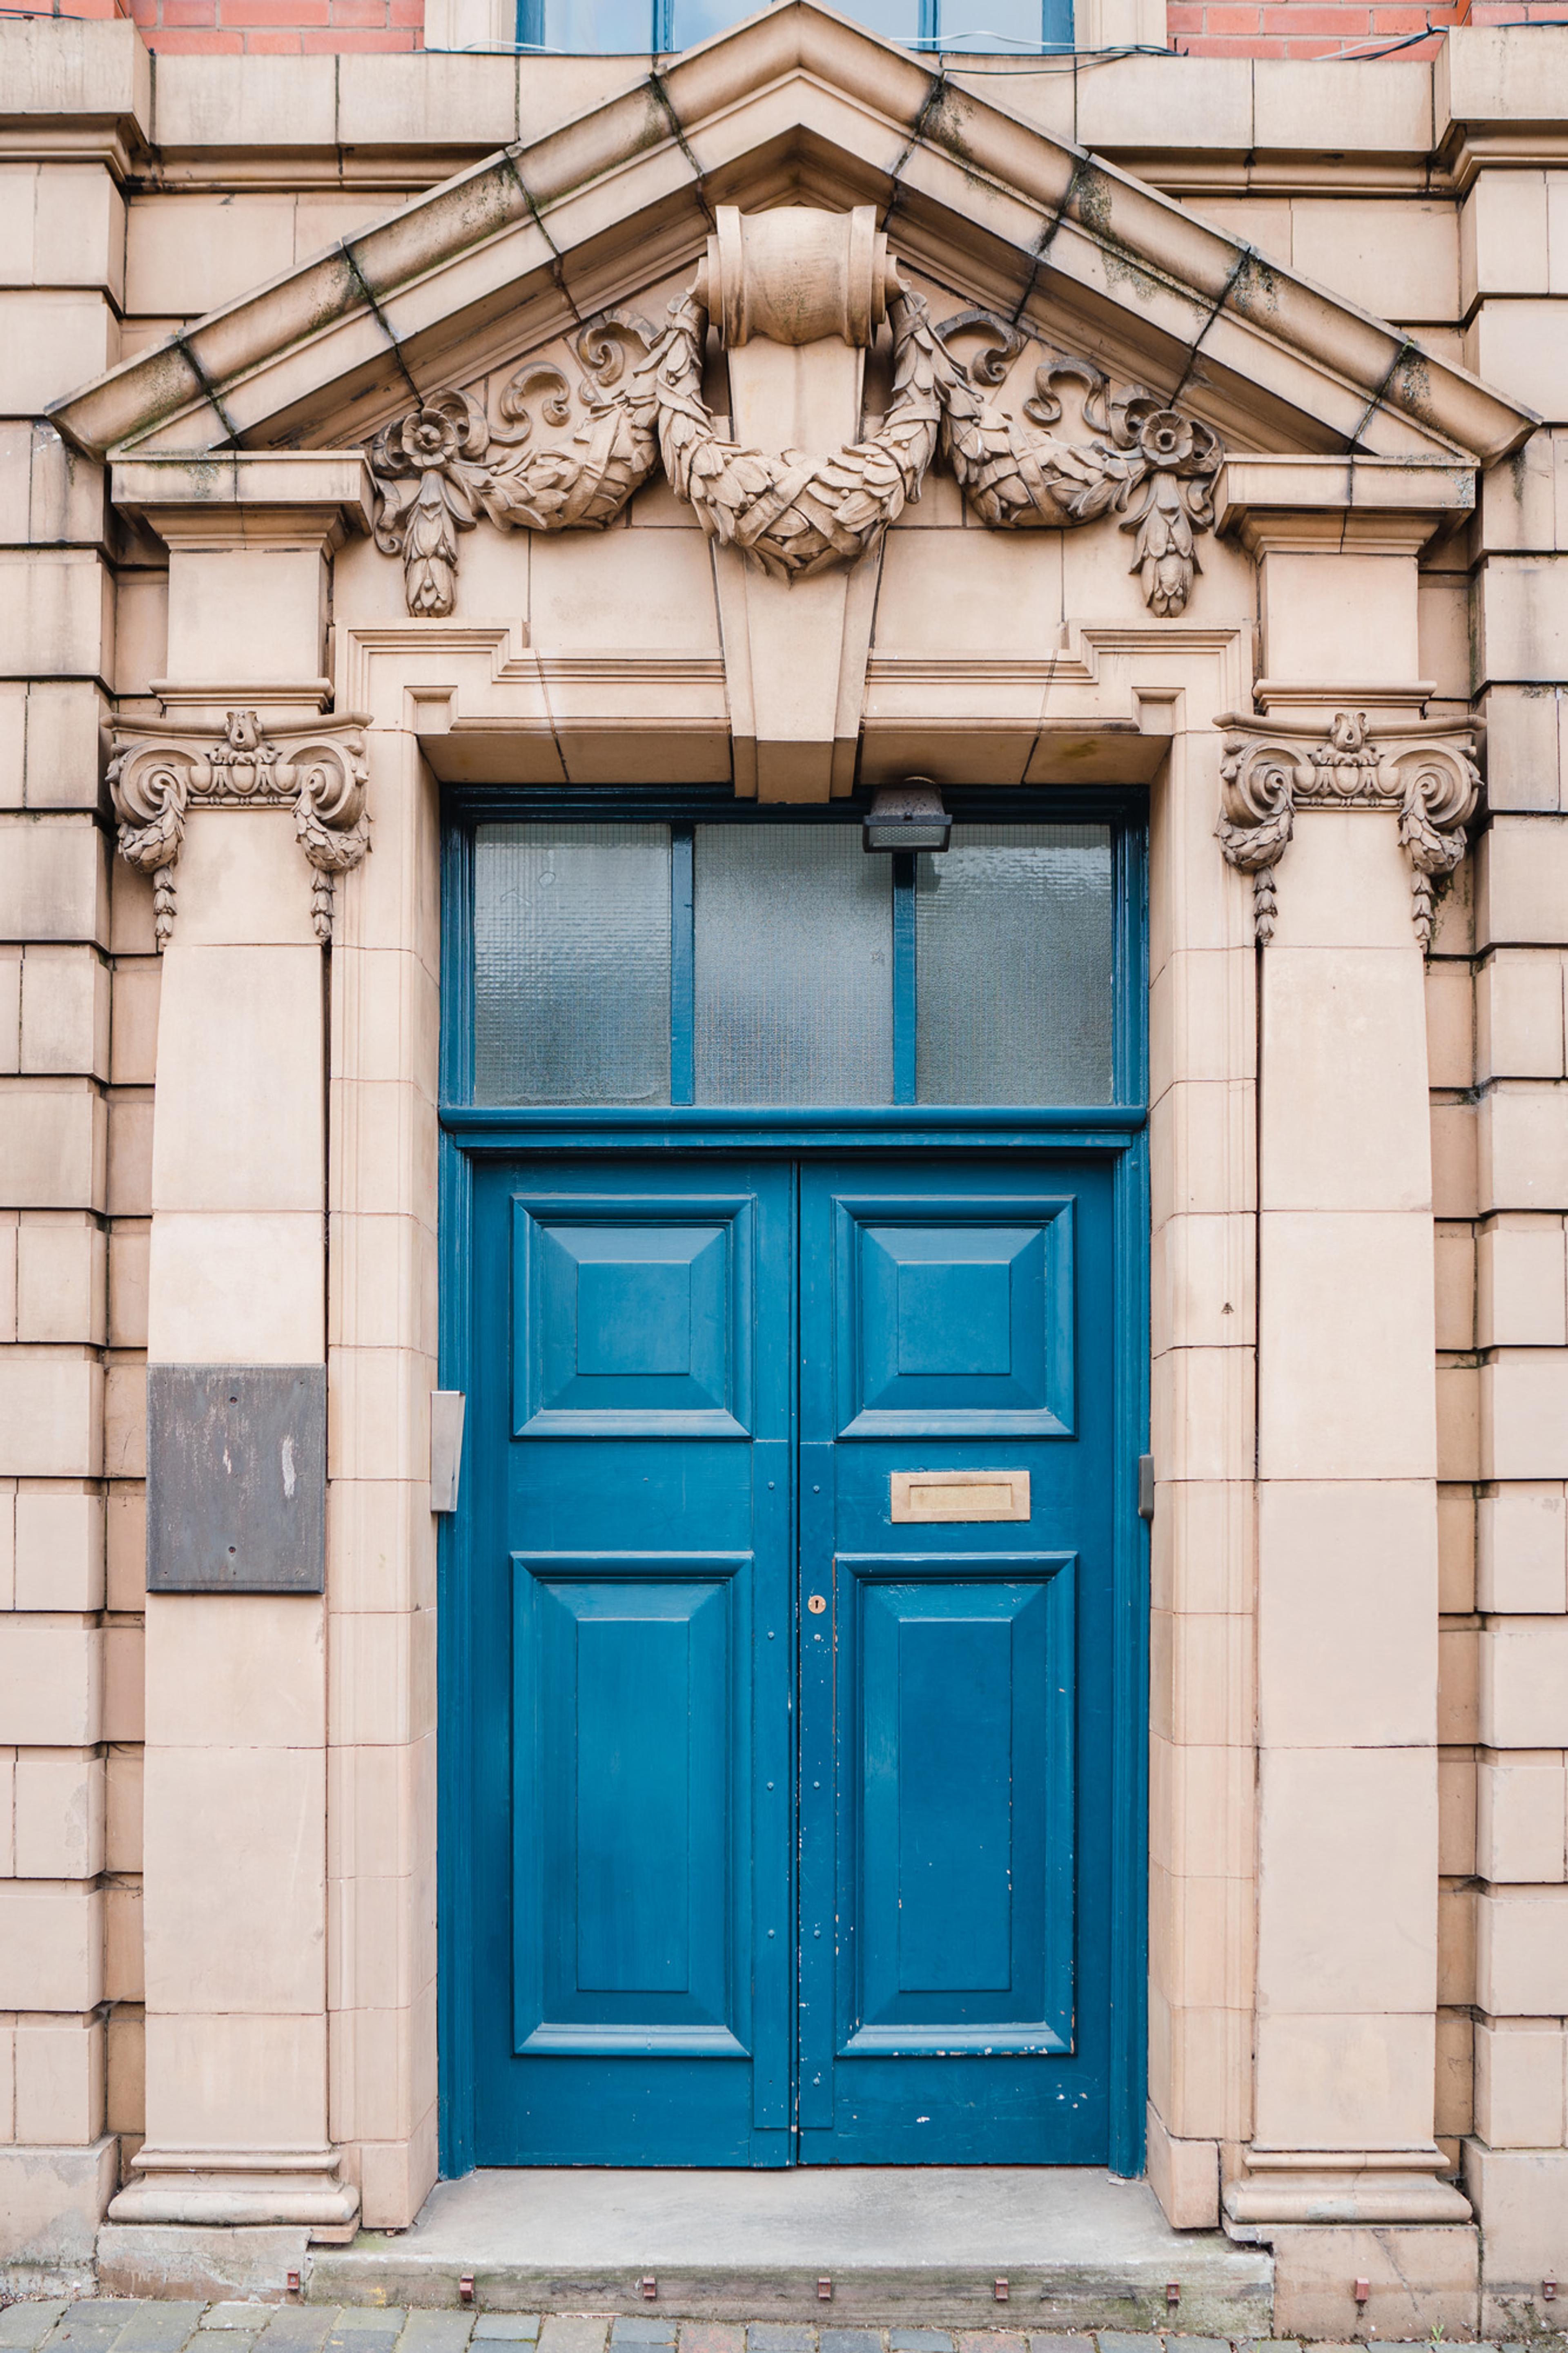 A blue double door with brass letterbox under an ornate facade